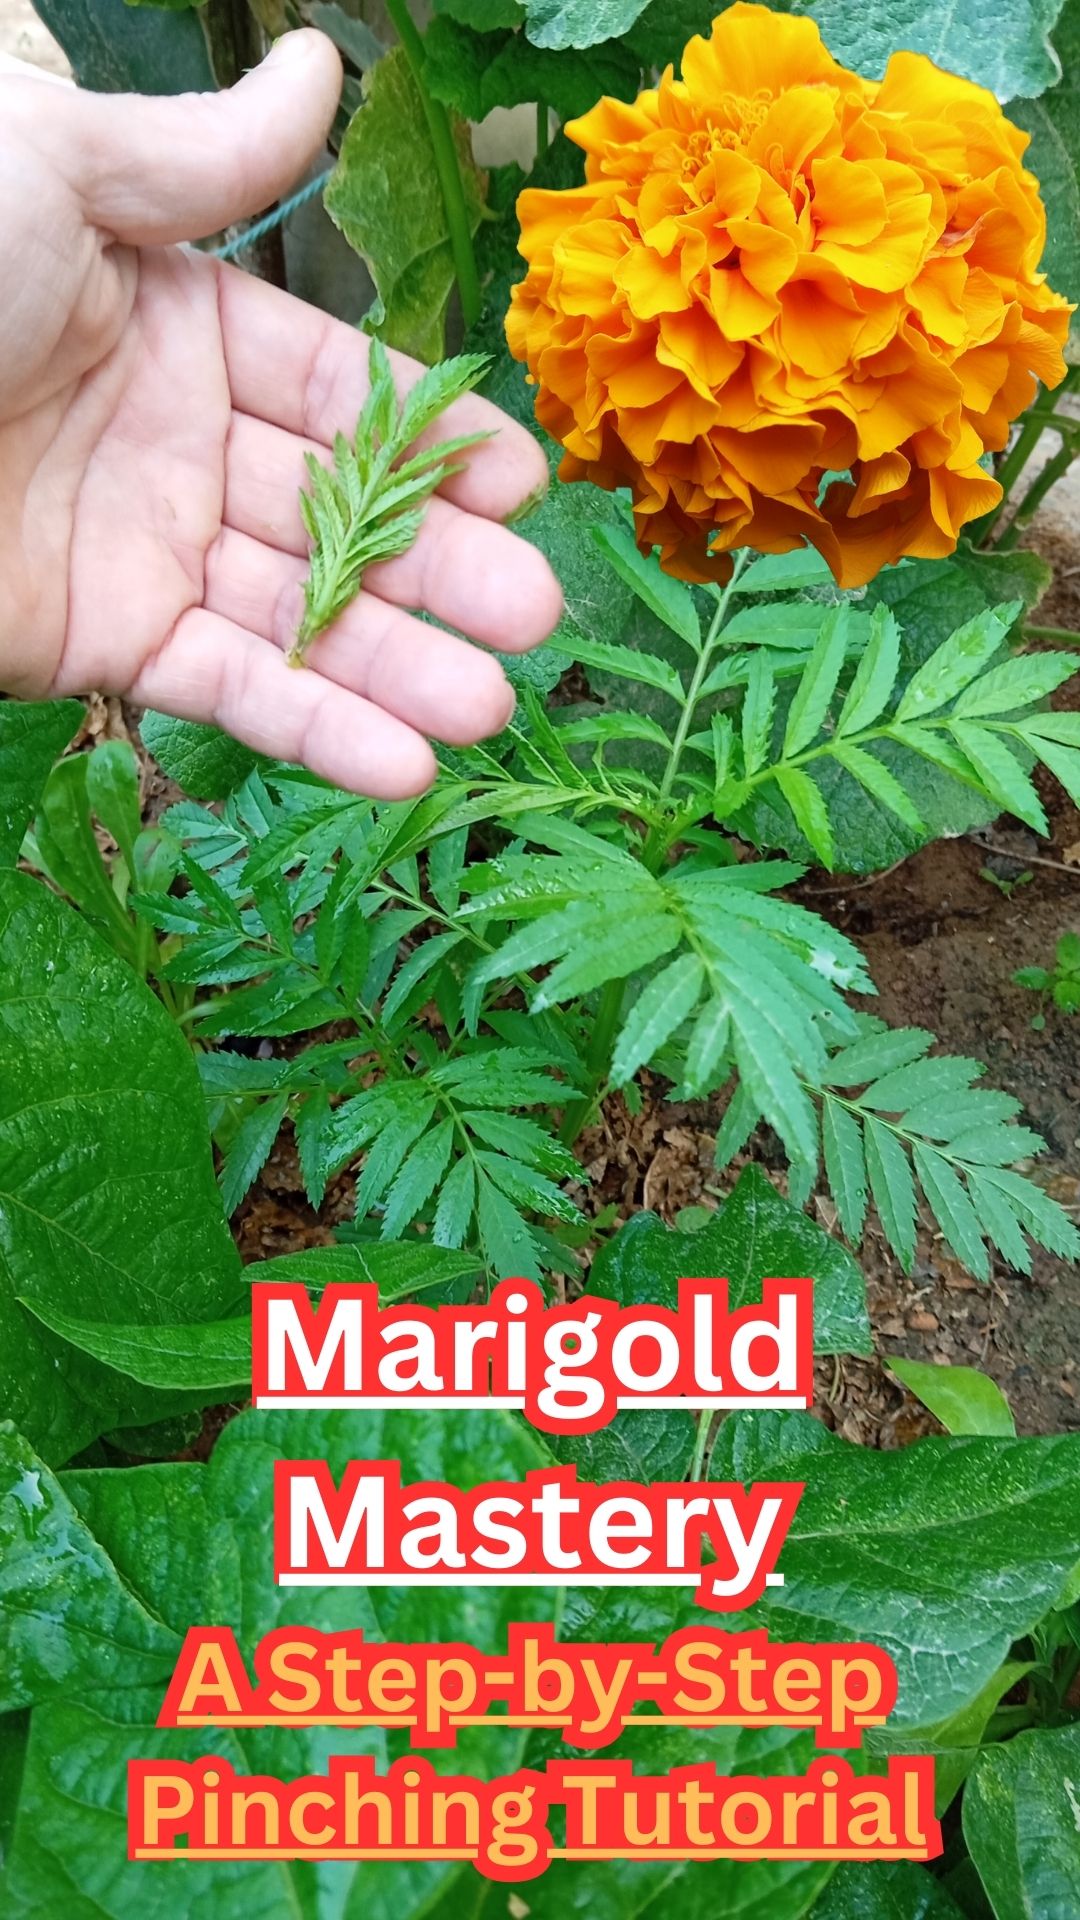 In this comprehensive guide, we will delve deep into the art of pinching marigolds, unveiling the secrets that professional gardeners have utilized for years. From identifying the perfect time to execute the technique with precision, we've got you covered every step of the way.